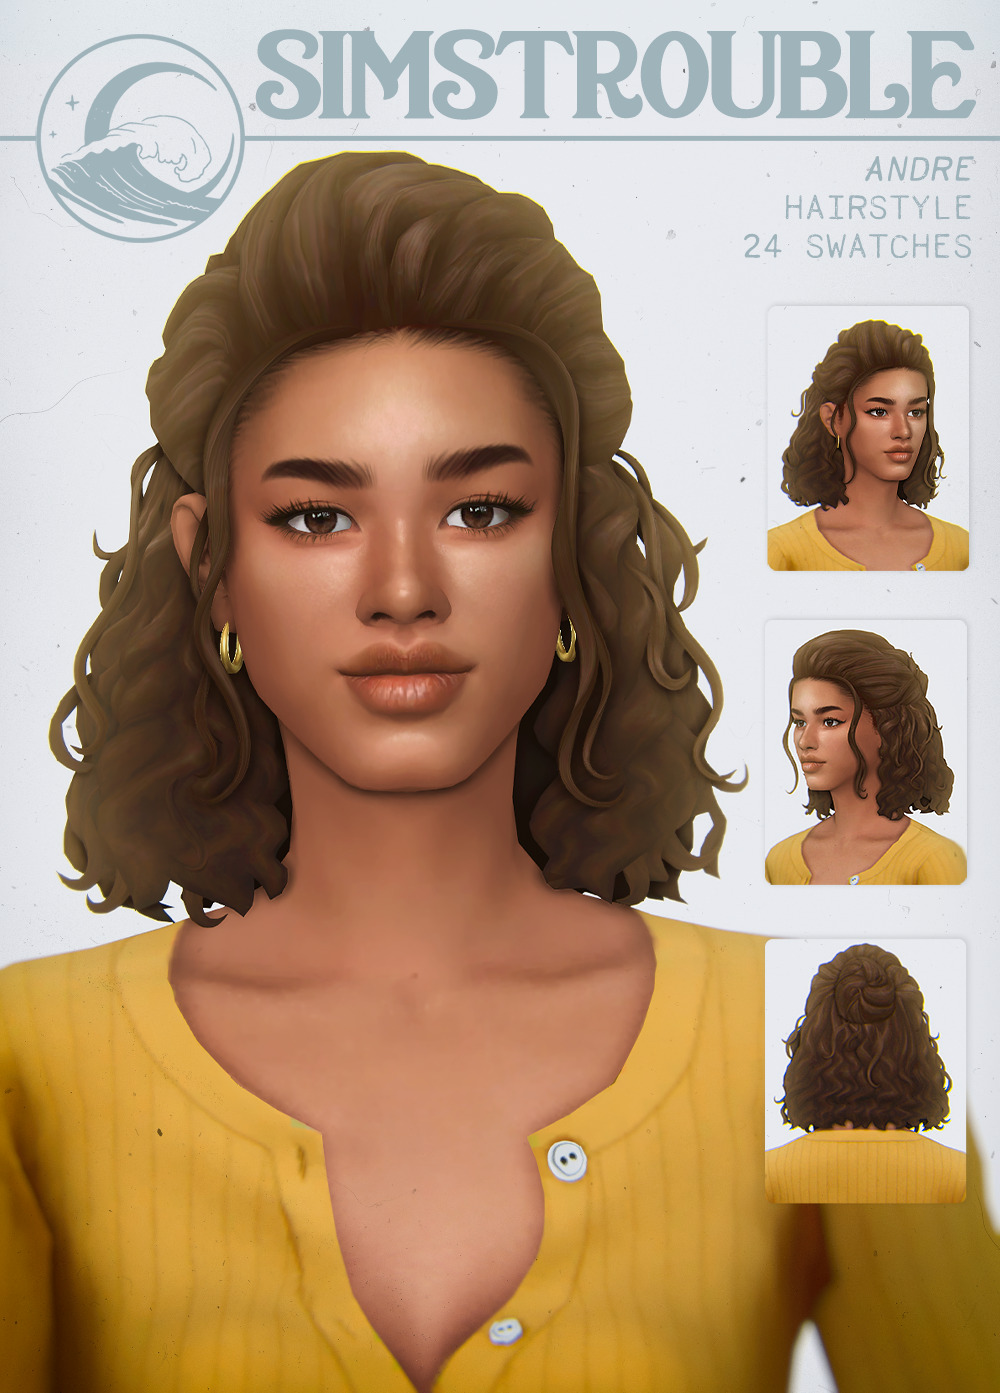 ANDRE by simstrouble• Base Game Compatible
• 24 Swatches
• All LODs, Hat Compatible, All Maps, V1 16k poly, V2 9k poly
download (Patreon, free) | Instagram | Pinterest